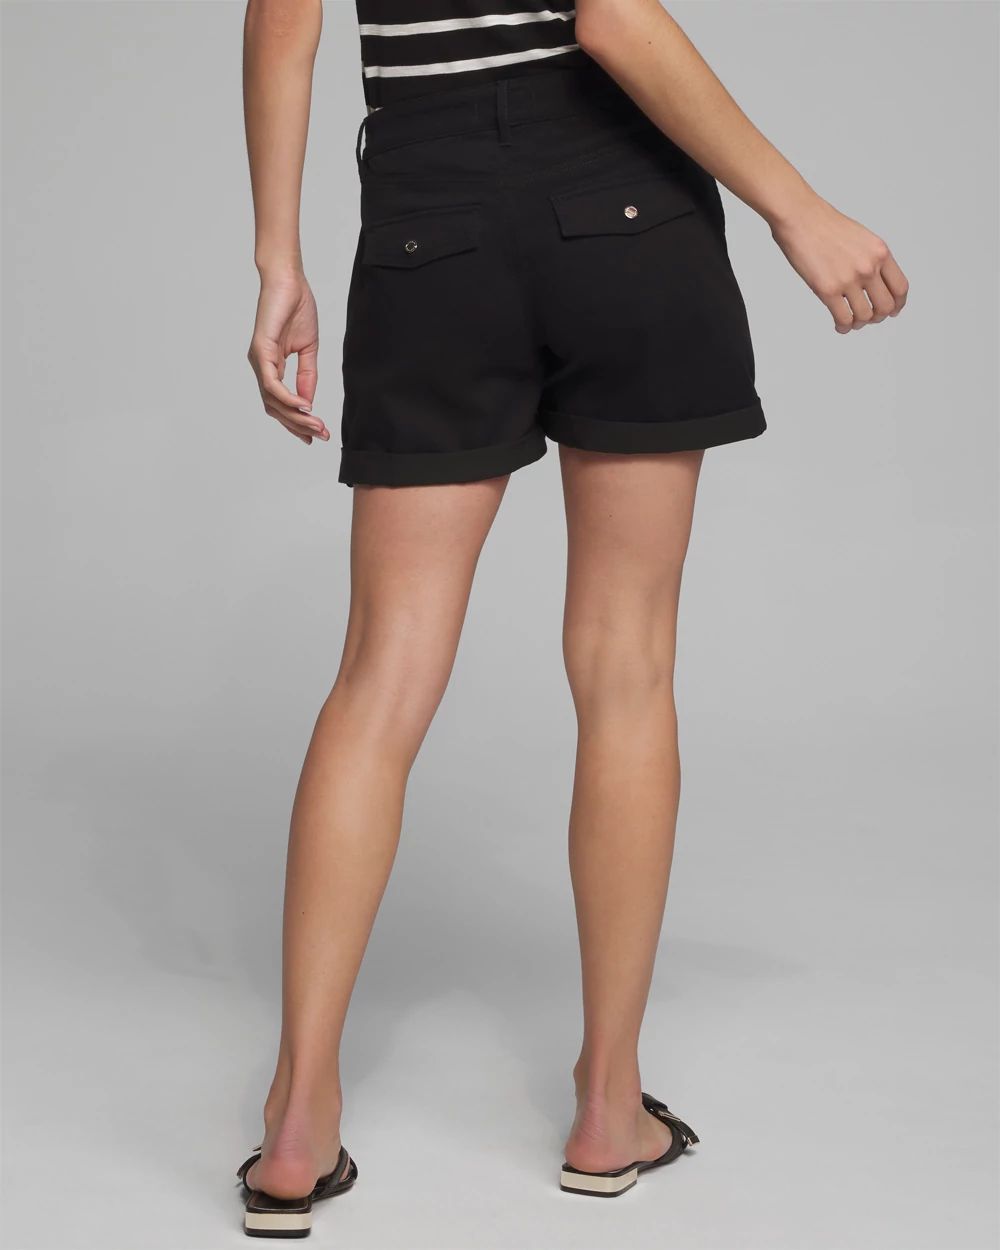 Outlet WHBM Utility Shorts click to view larger image.